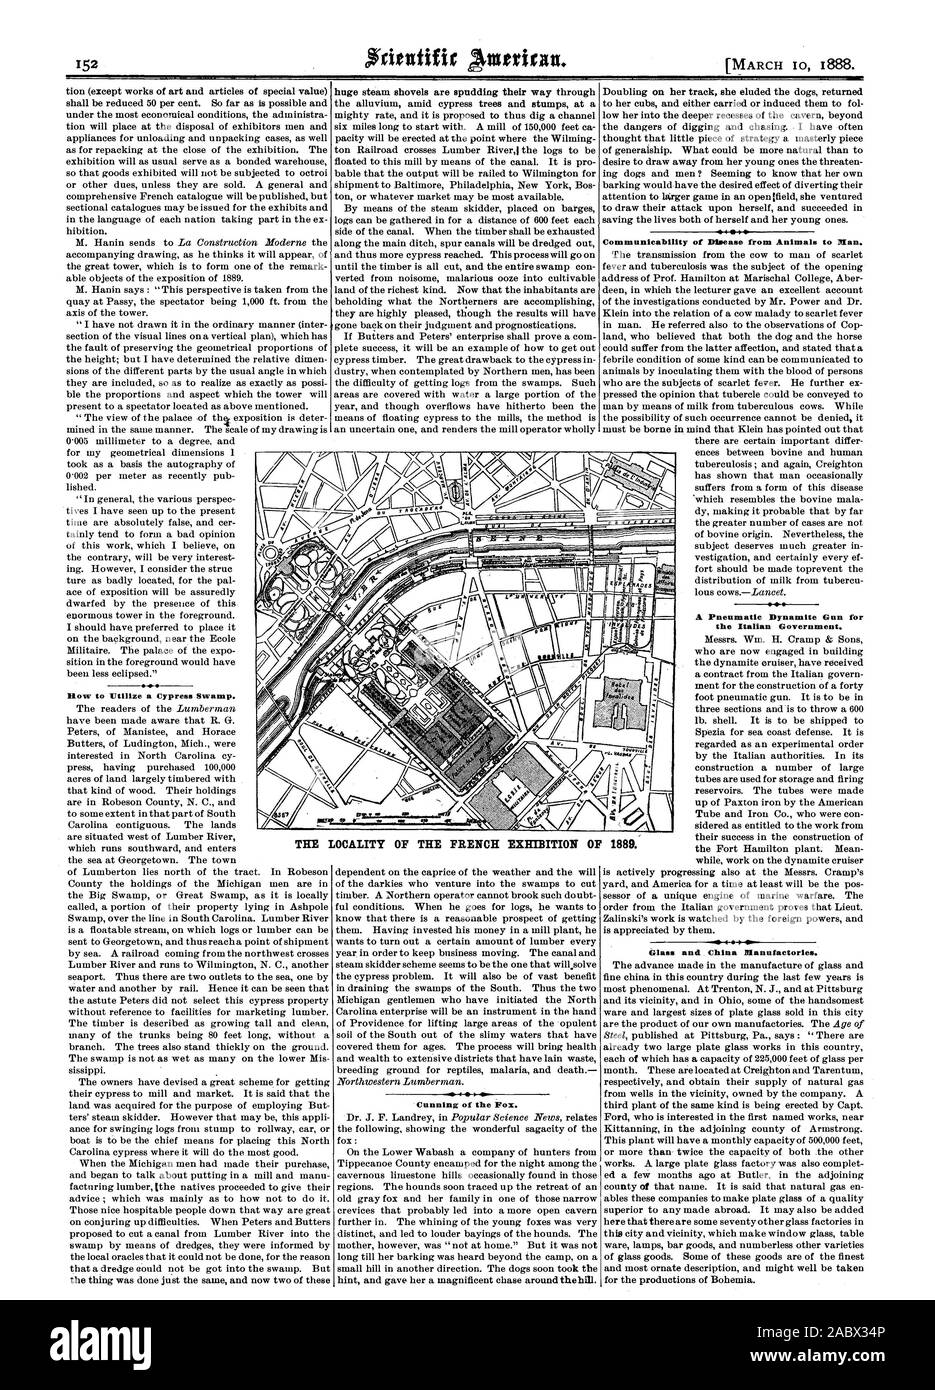 Mow to Utilize a Cypress Swamp. Cunning of the Fox. Communicability of Disease from Animals to Man. A Pneumatic Dynamite Gun for the Italian Government. Glass and China Manufactories. THE LOCALITY OF THE FRENCH EXHIBITION OF 1889., scientific american, 1888-03-10 Stock Photo